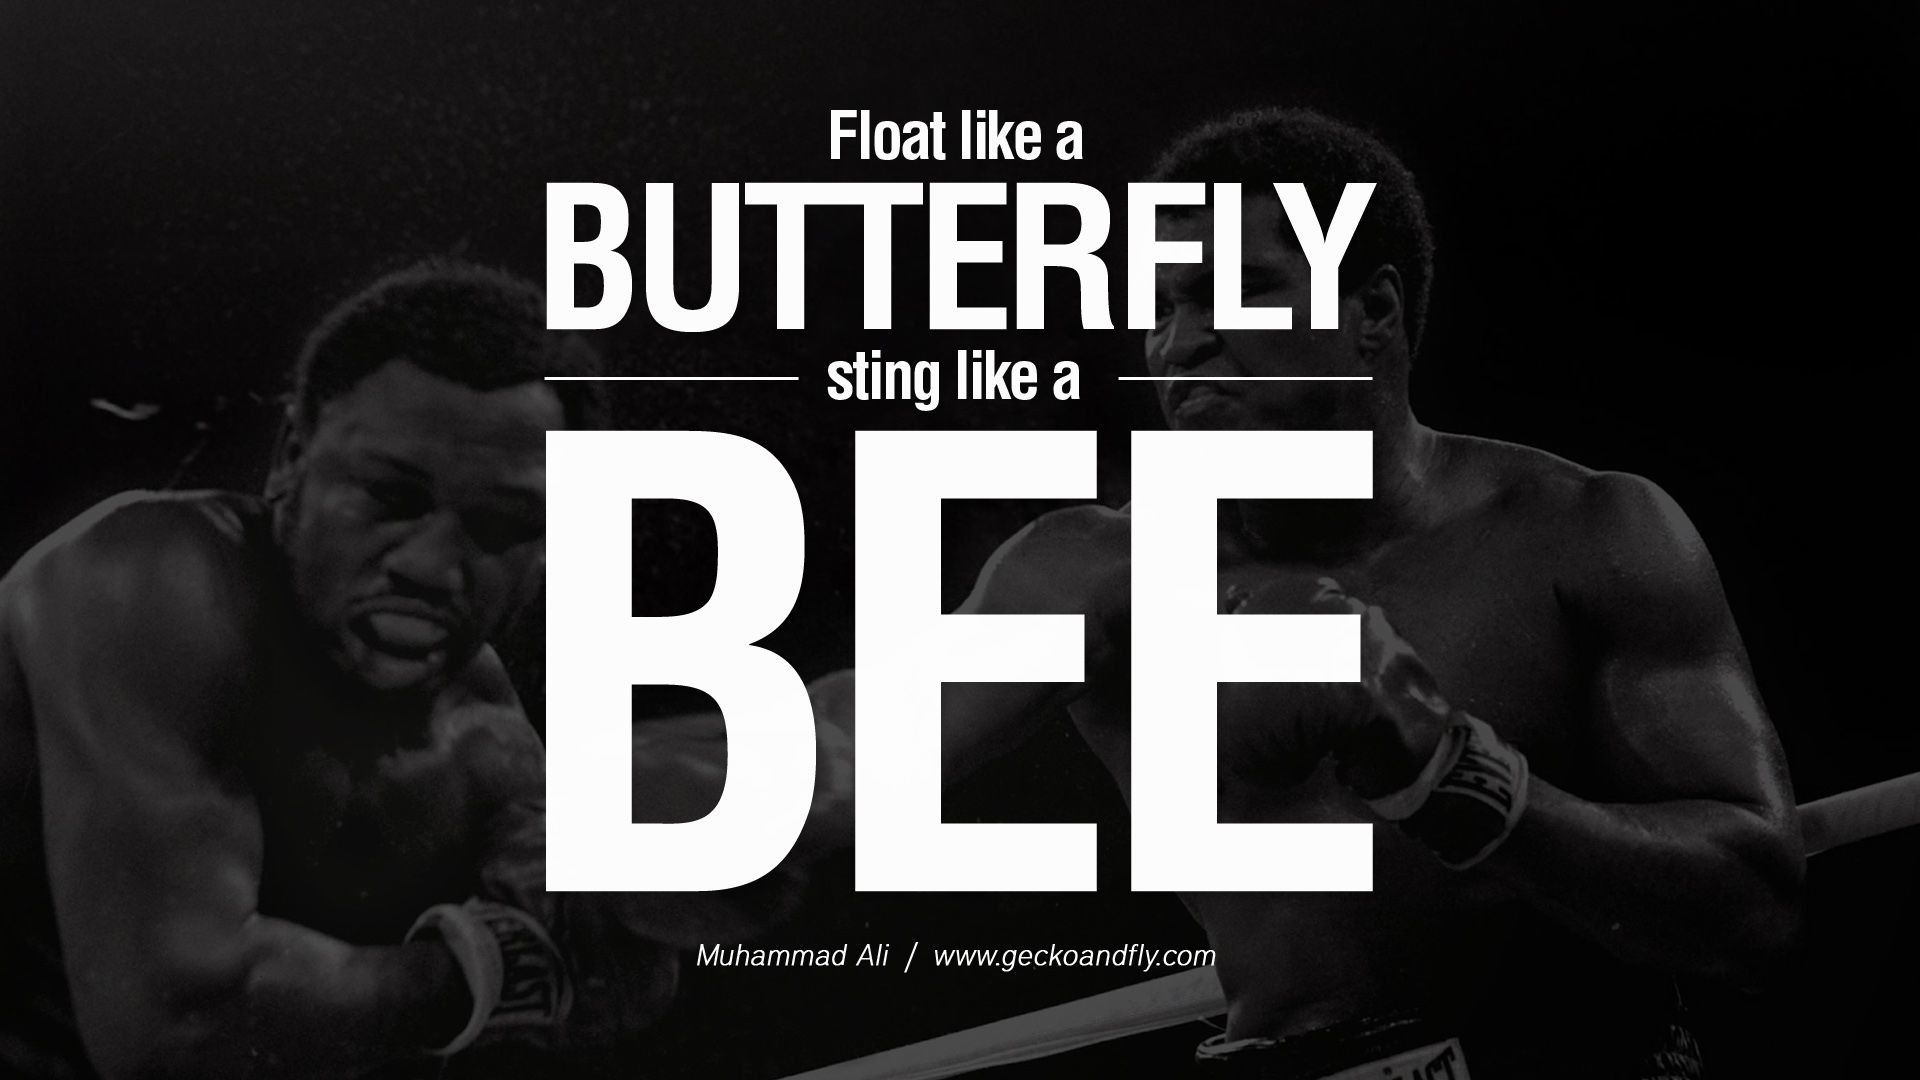 Boxing Quotes Wallpapers